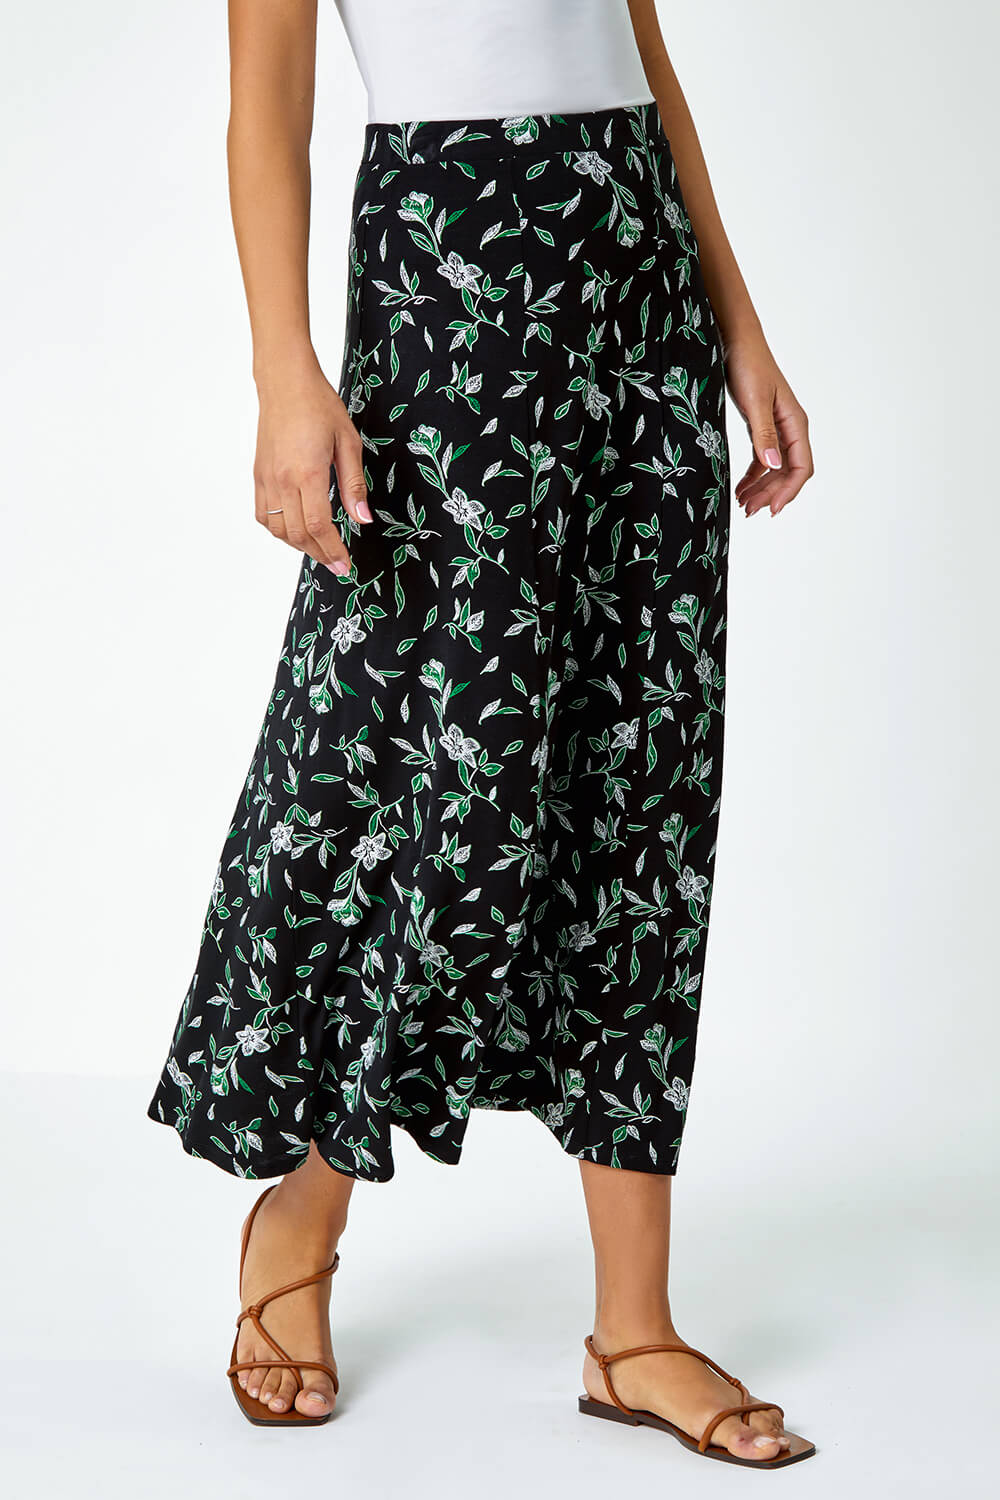 Green Floral Leaf Stretch Jersey Midi Skirt, Image 4 of 5